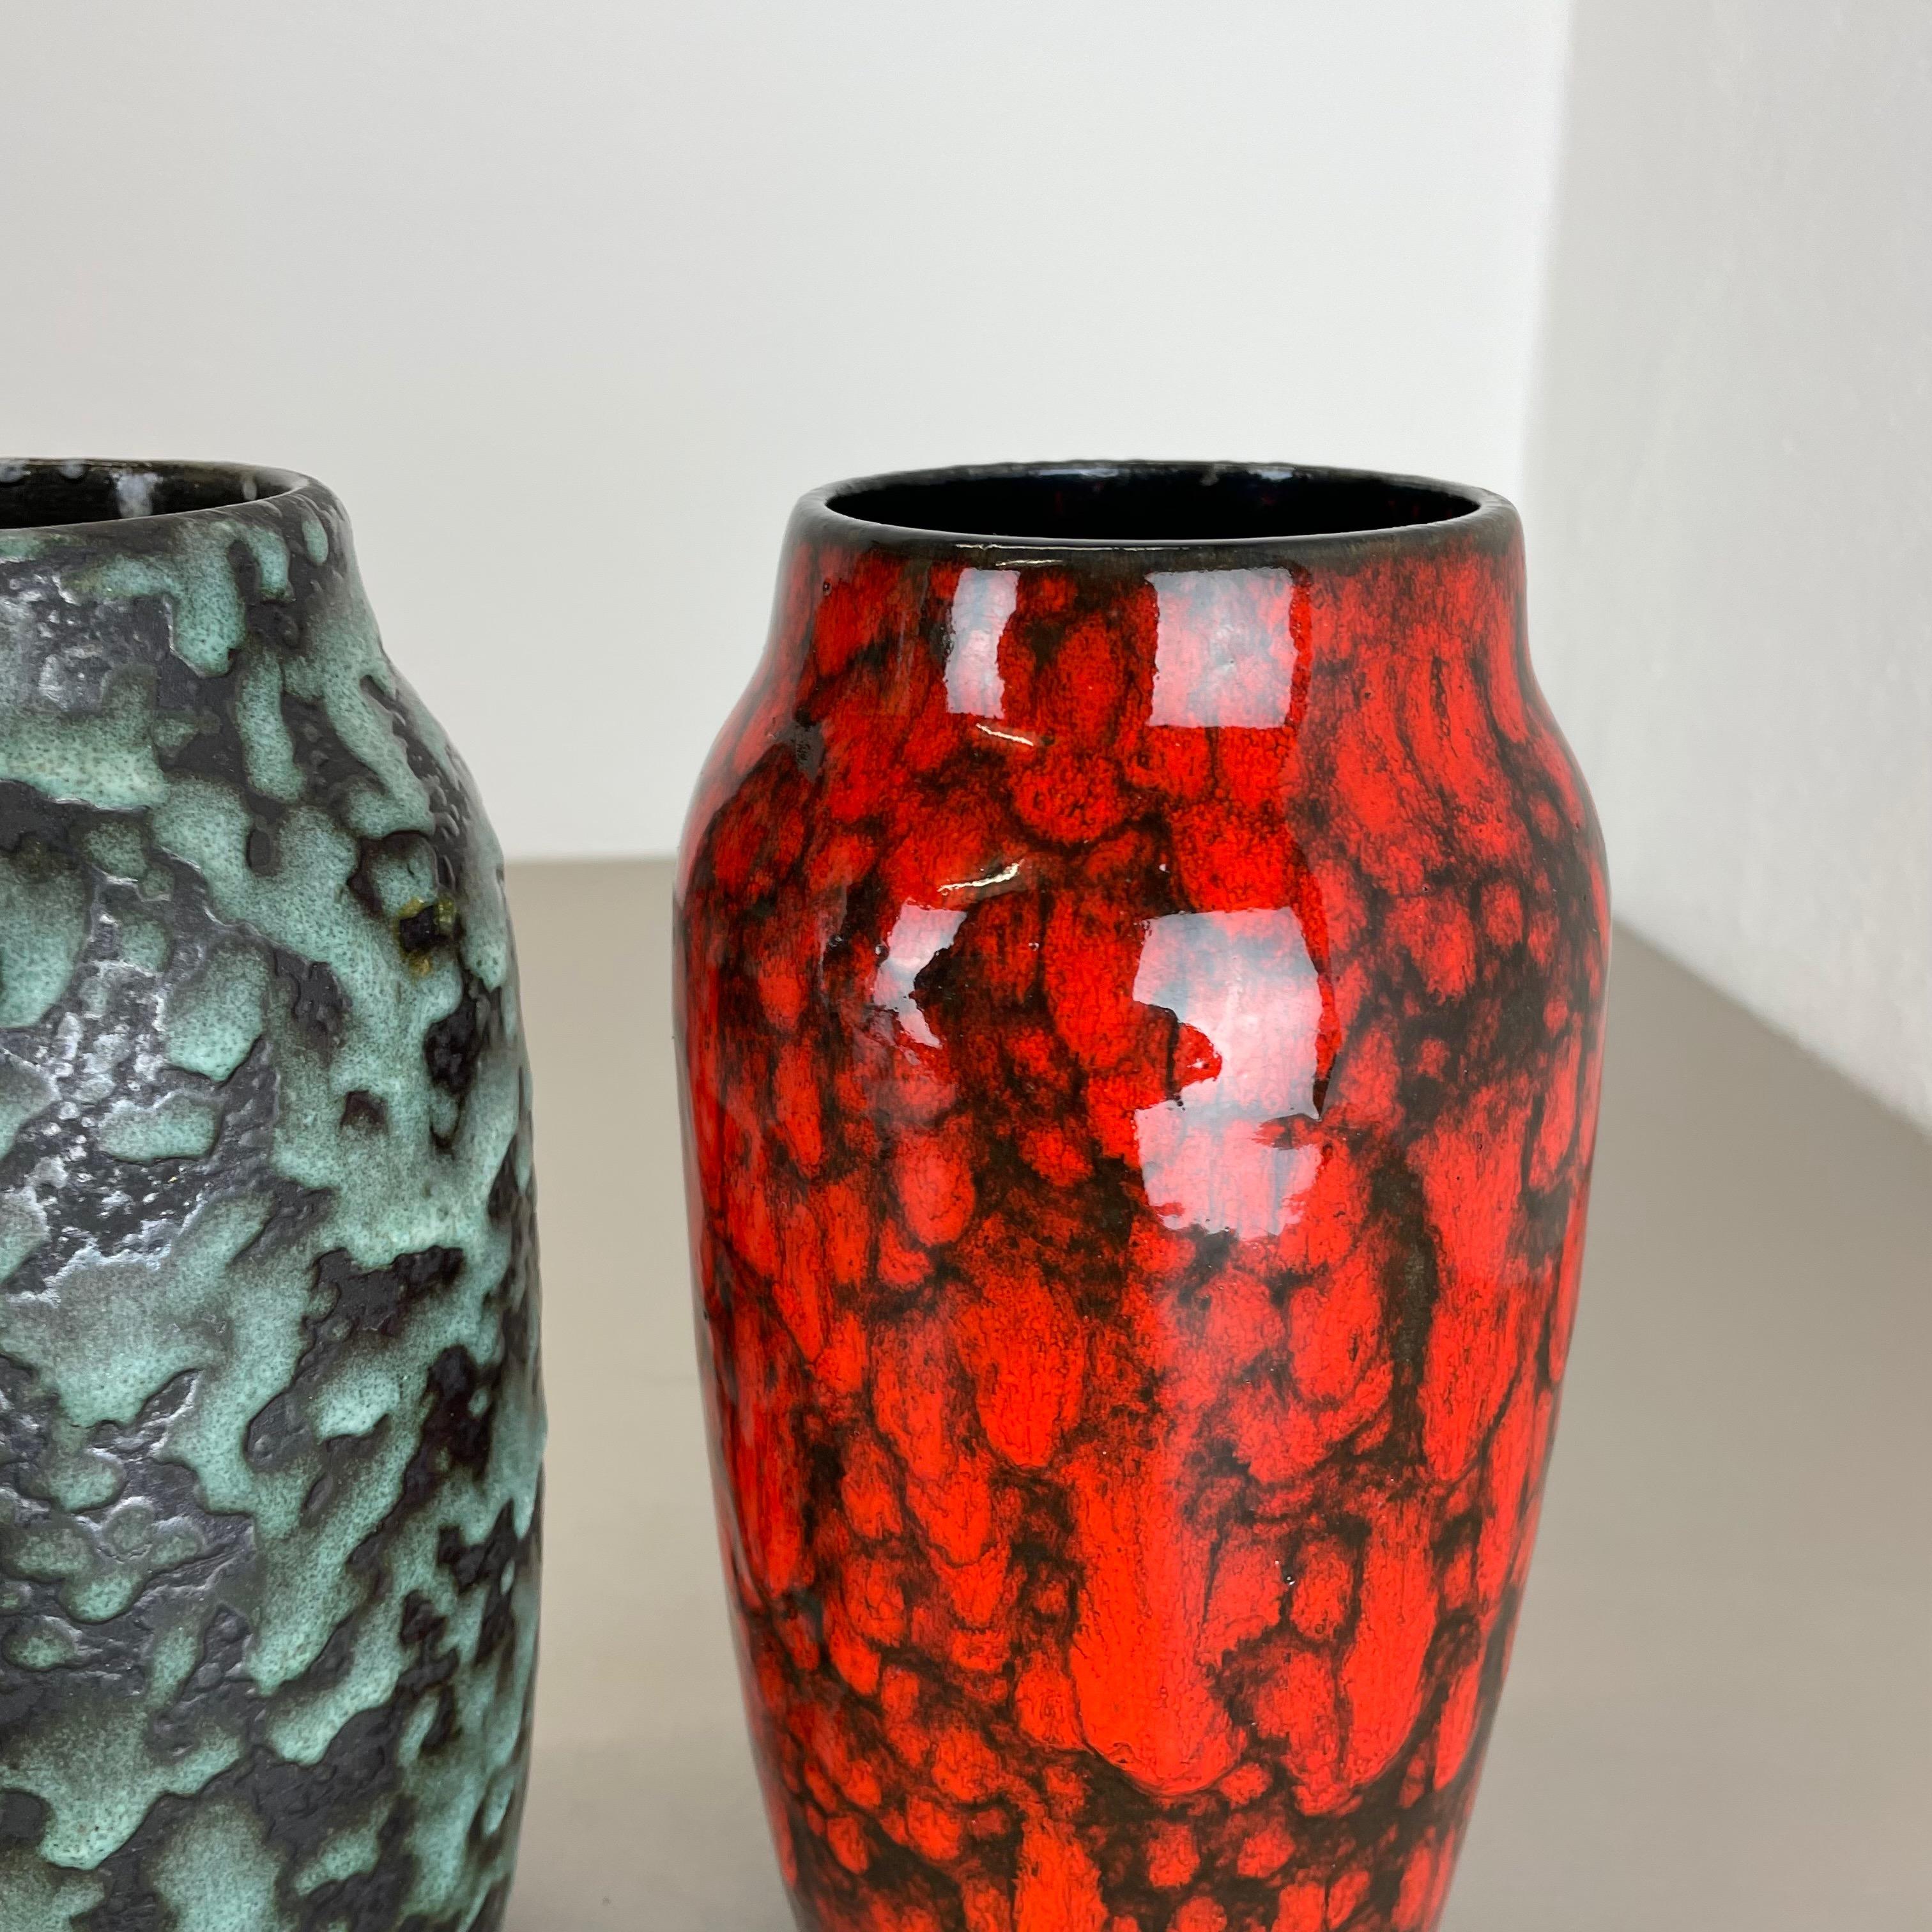 Set of 2 Rare Super Color Crusty Fat Lava Vases by Scheurich, Germany WGP, 1970s For Sale 4